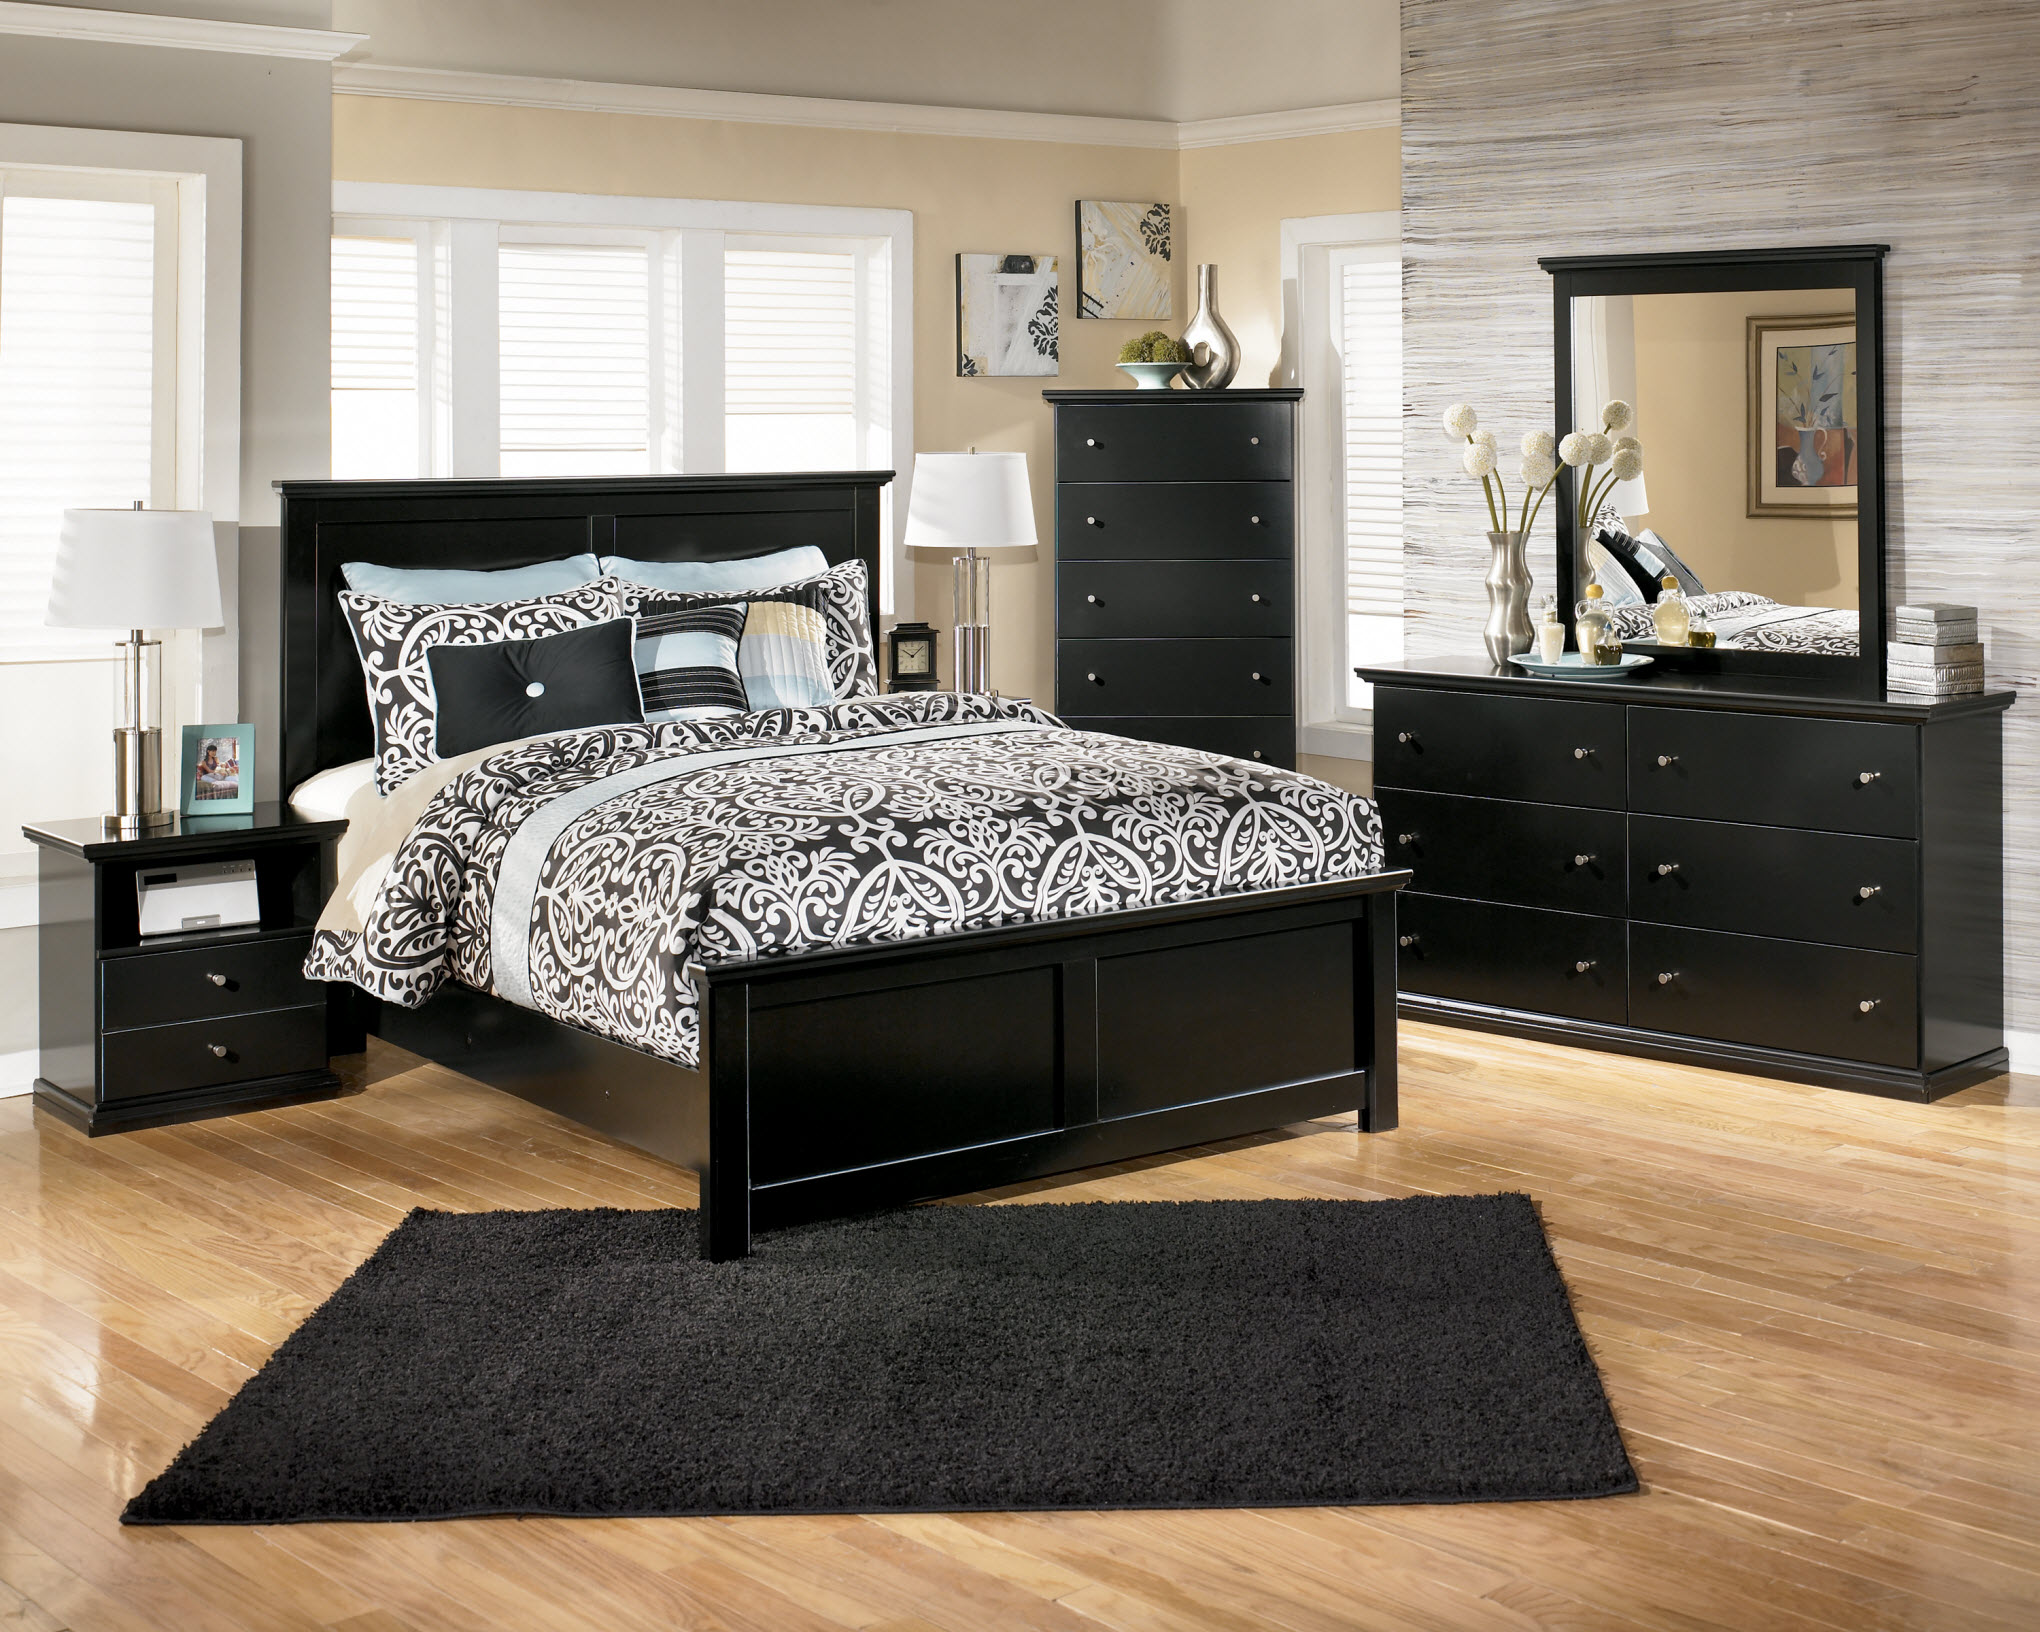 colors that go with black bedroom furniture